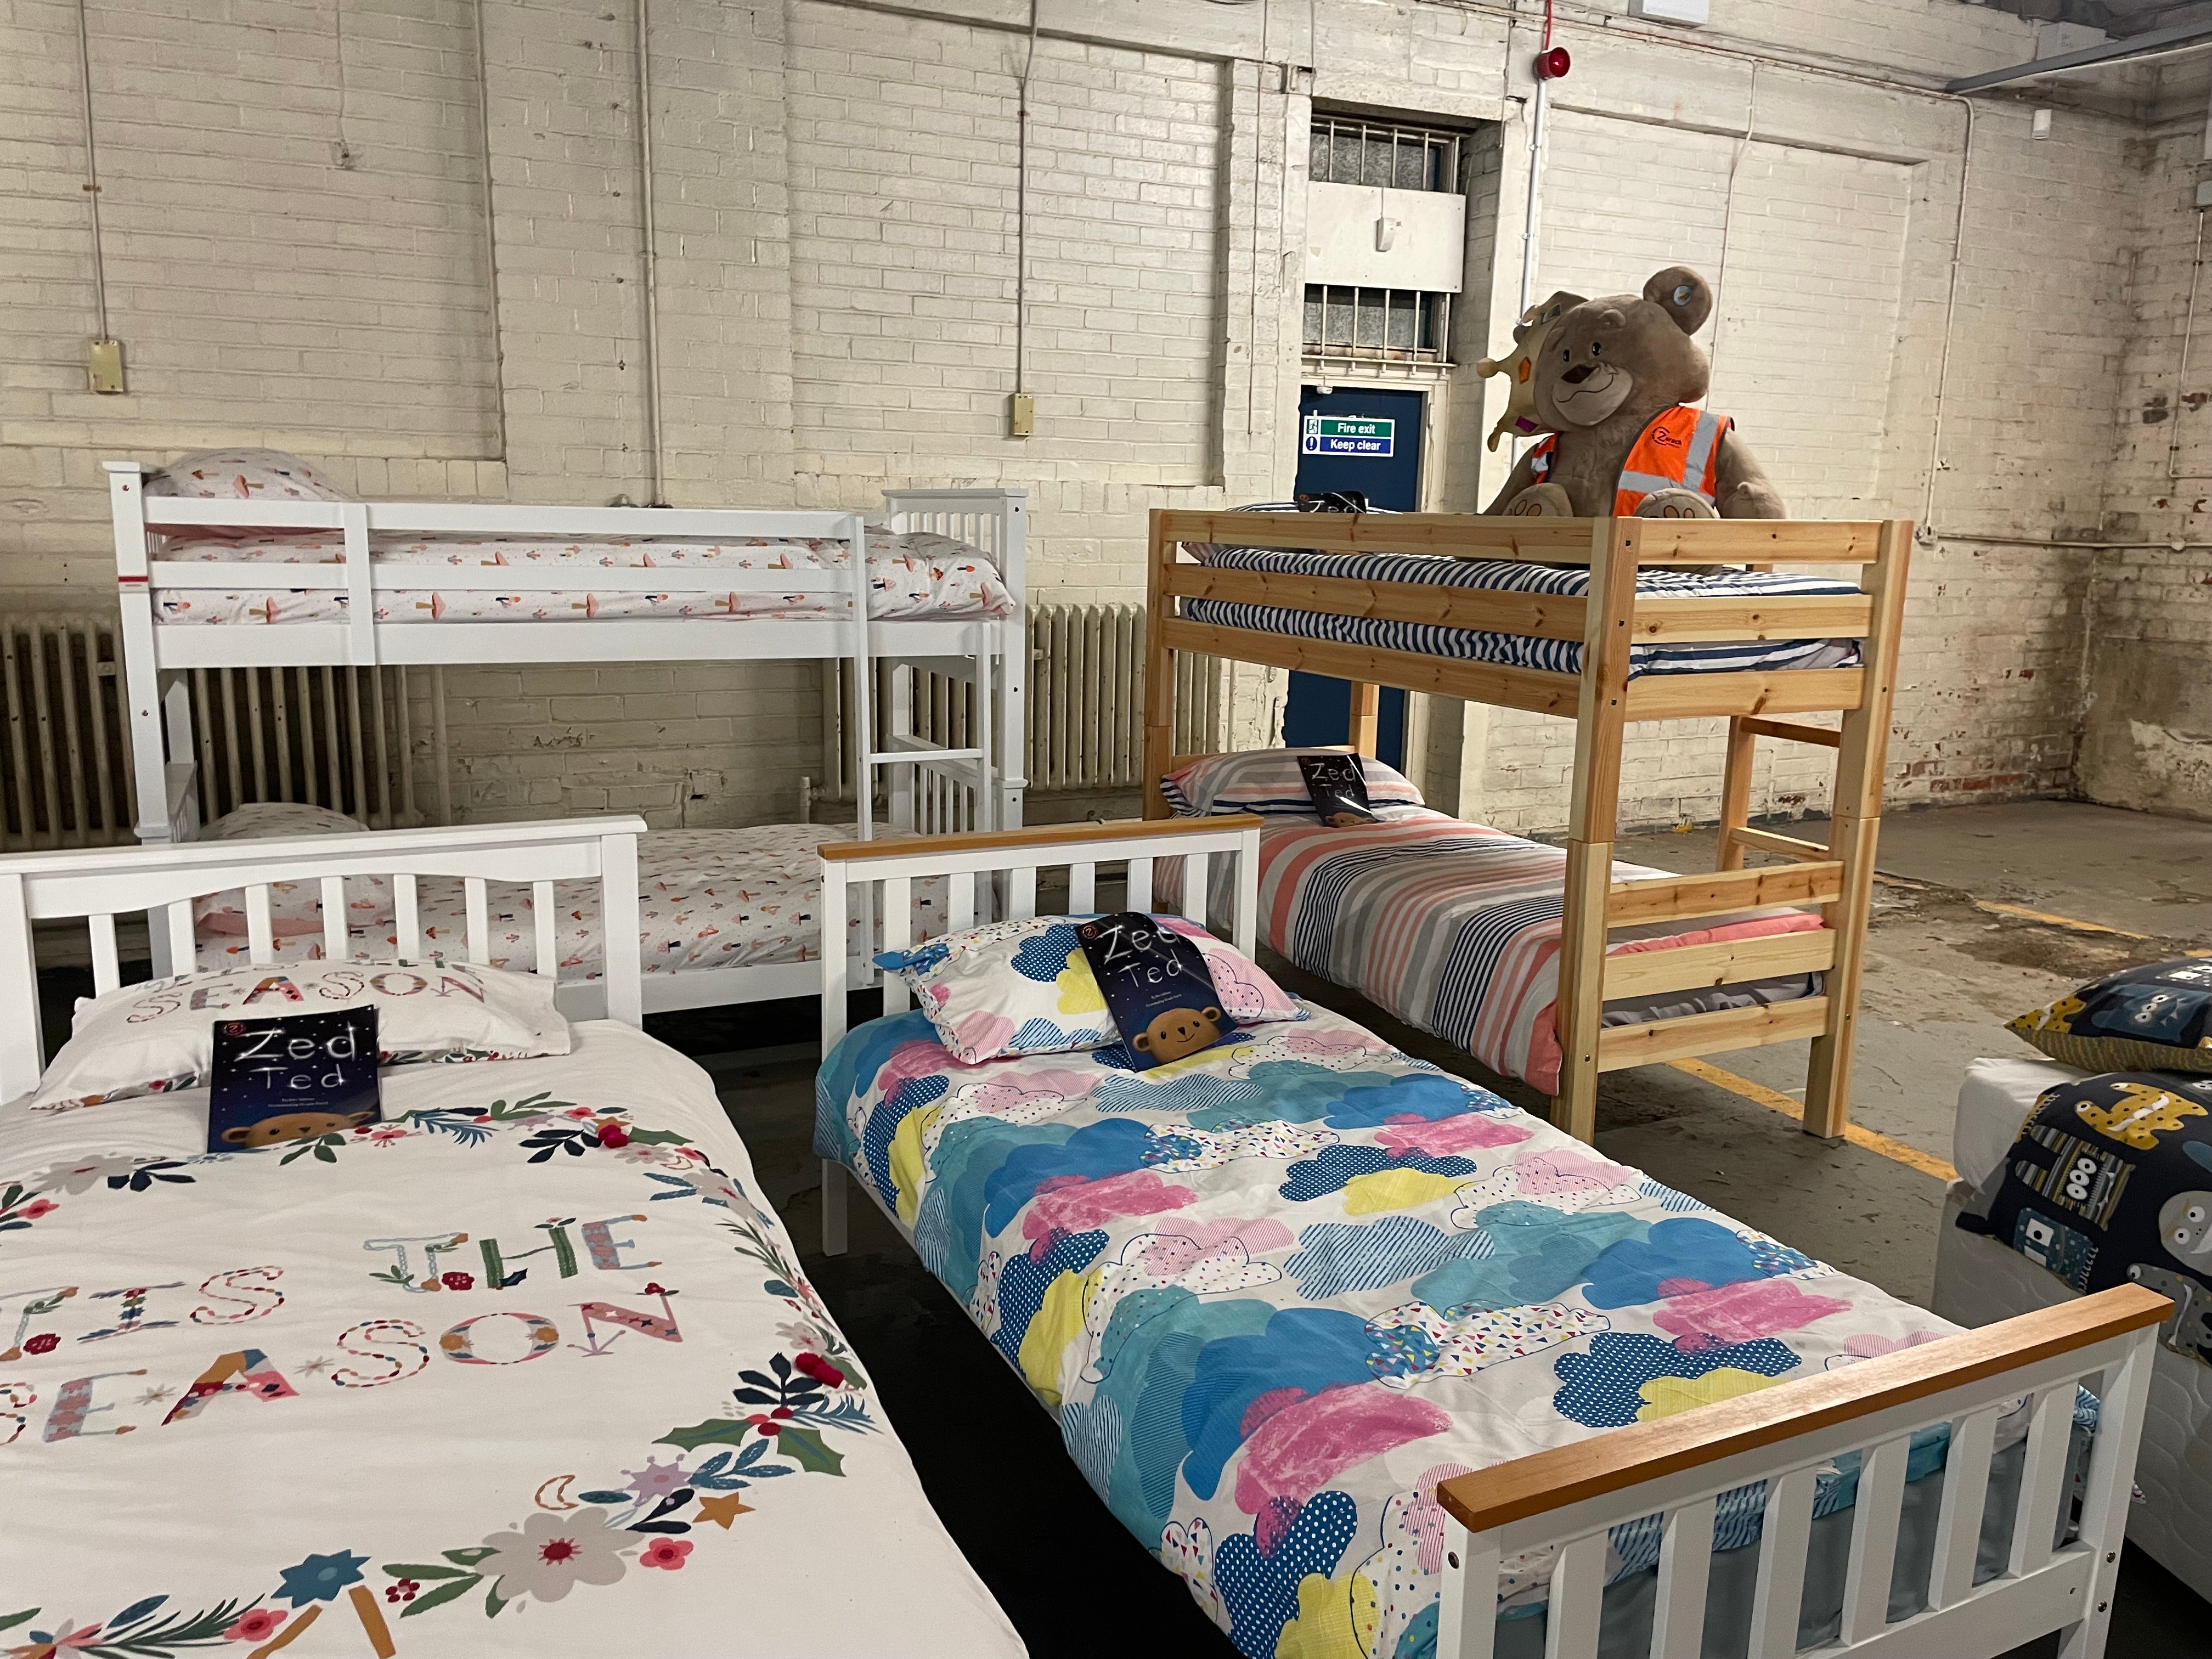 Parents have described their delight in receiving beds ahead of Christmas